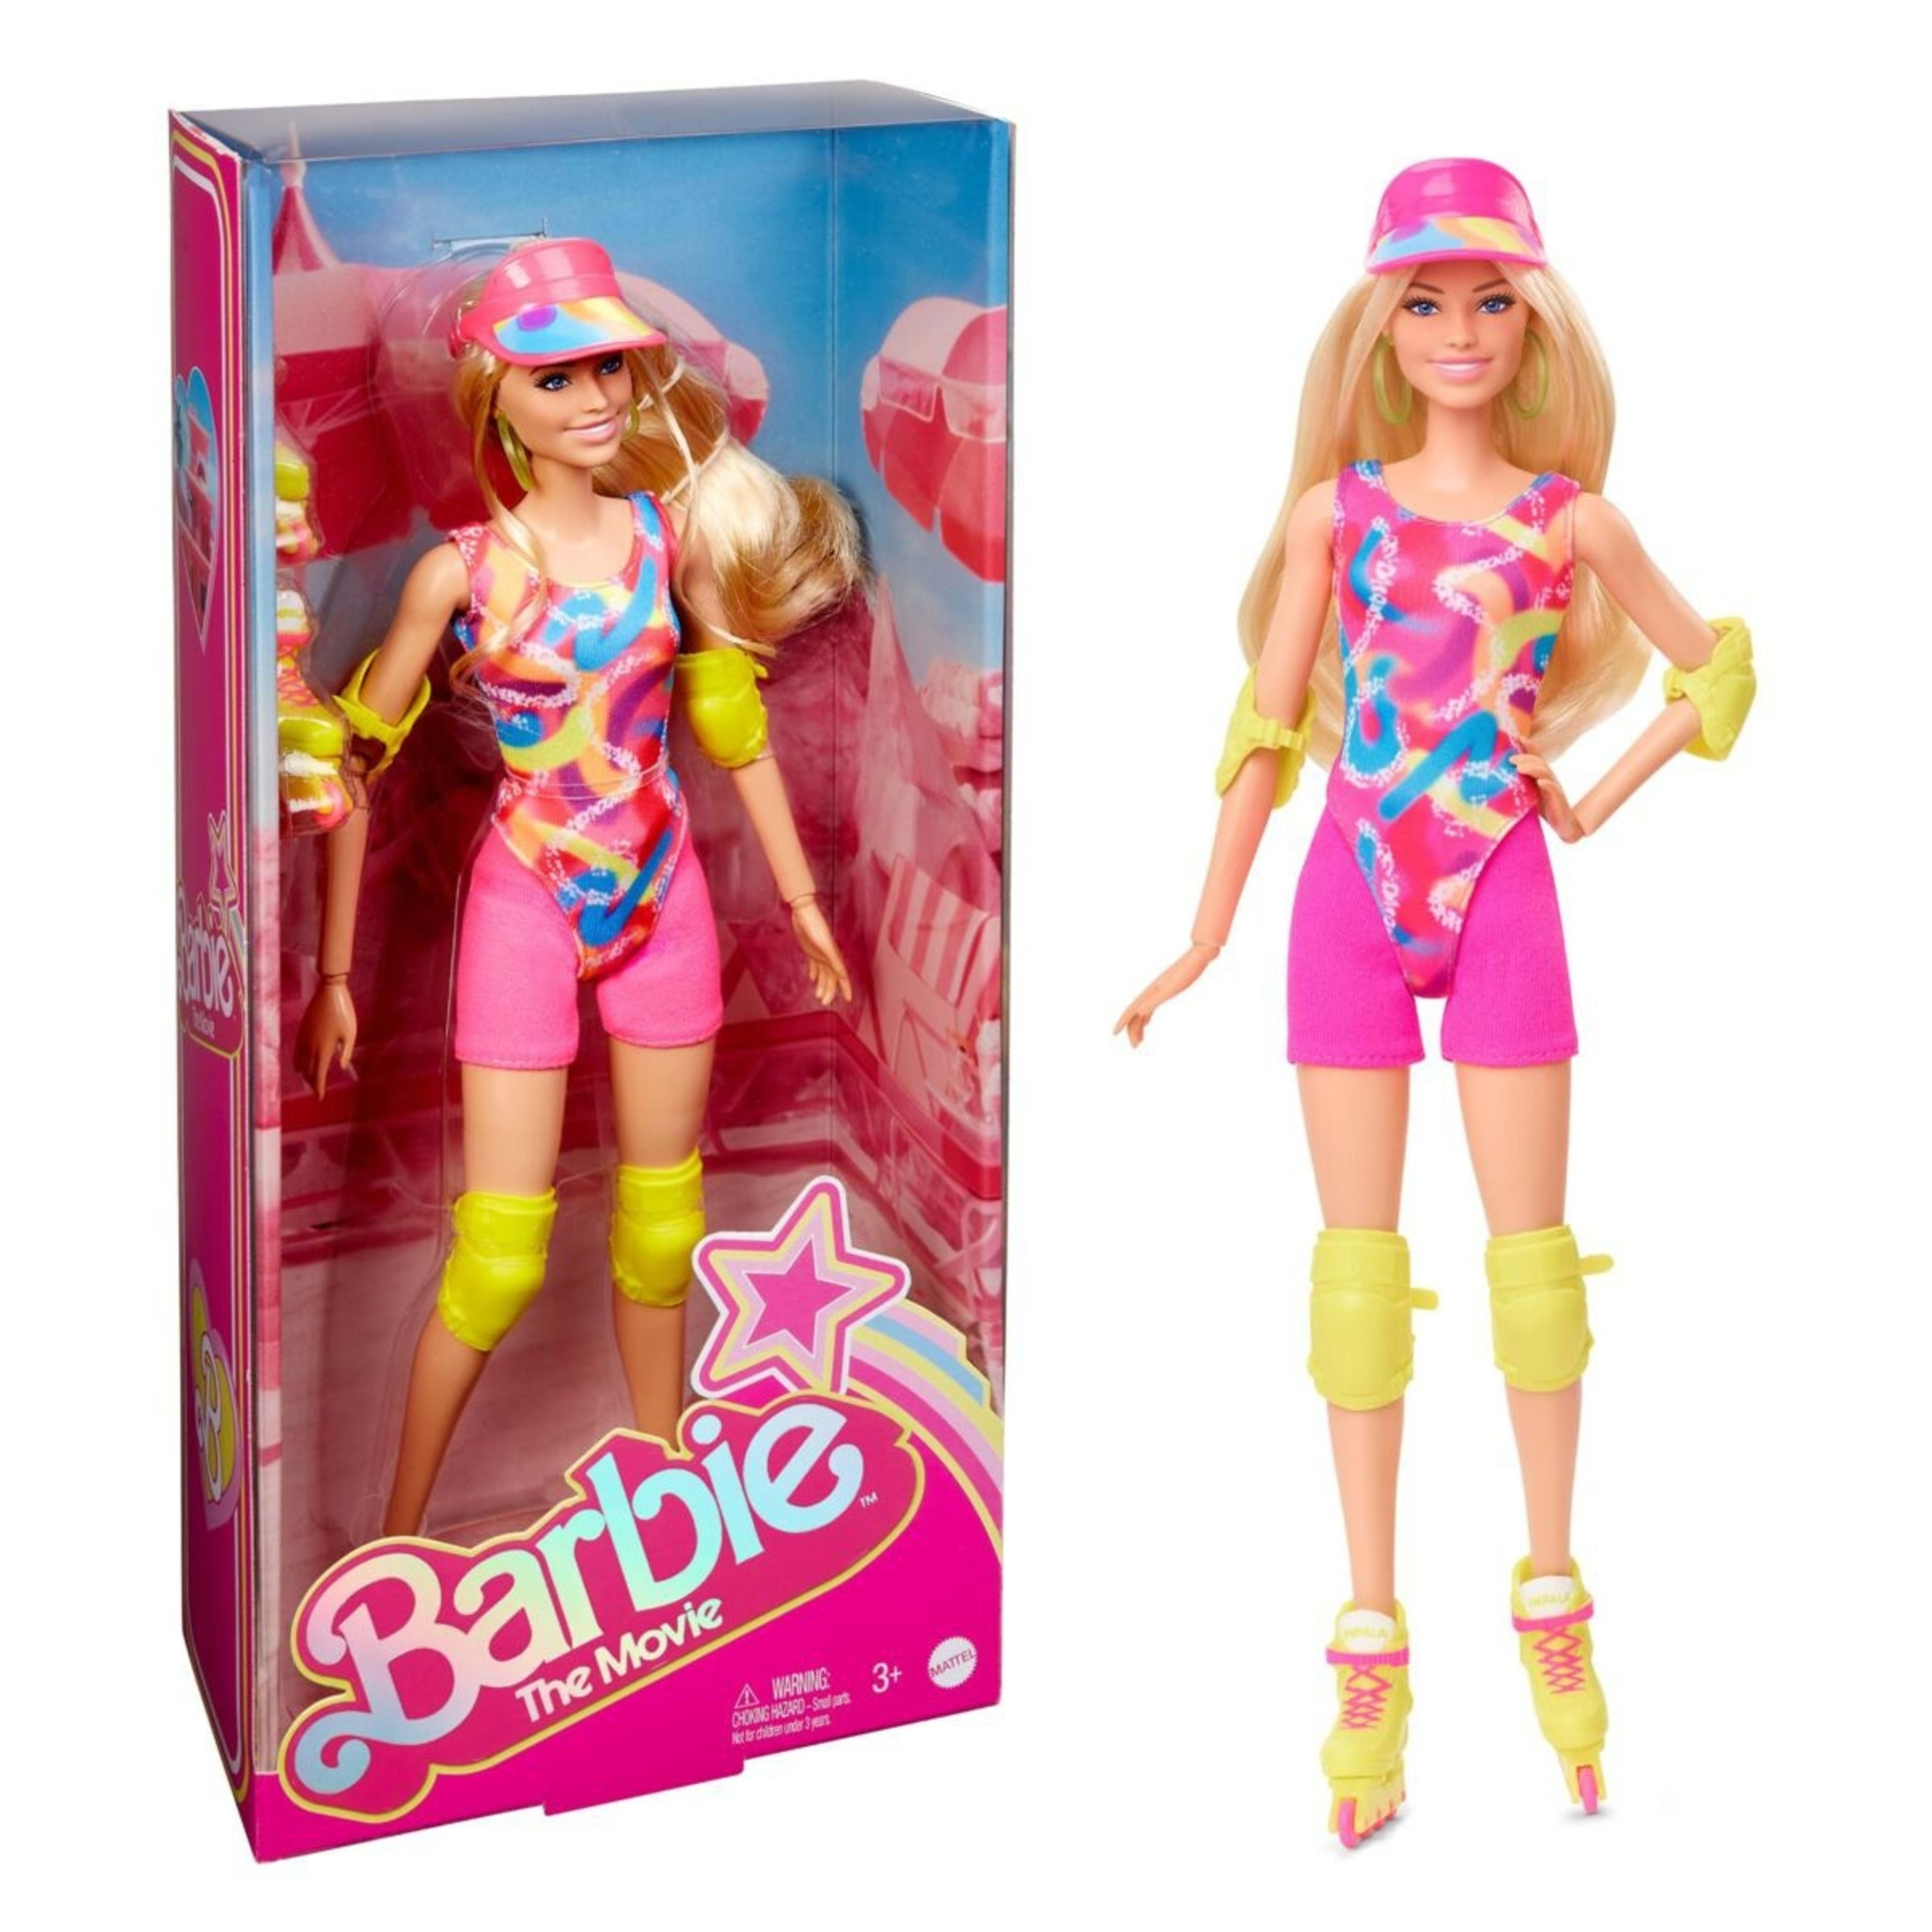 Barbie The Movie: Barbie in Skating Outfit